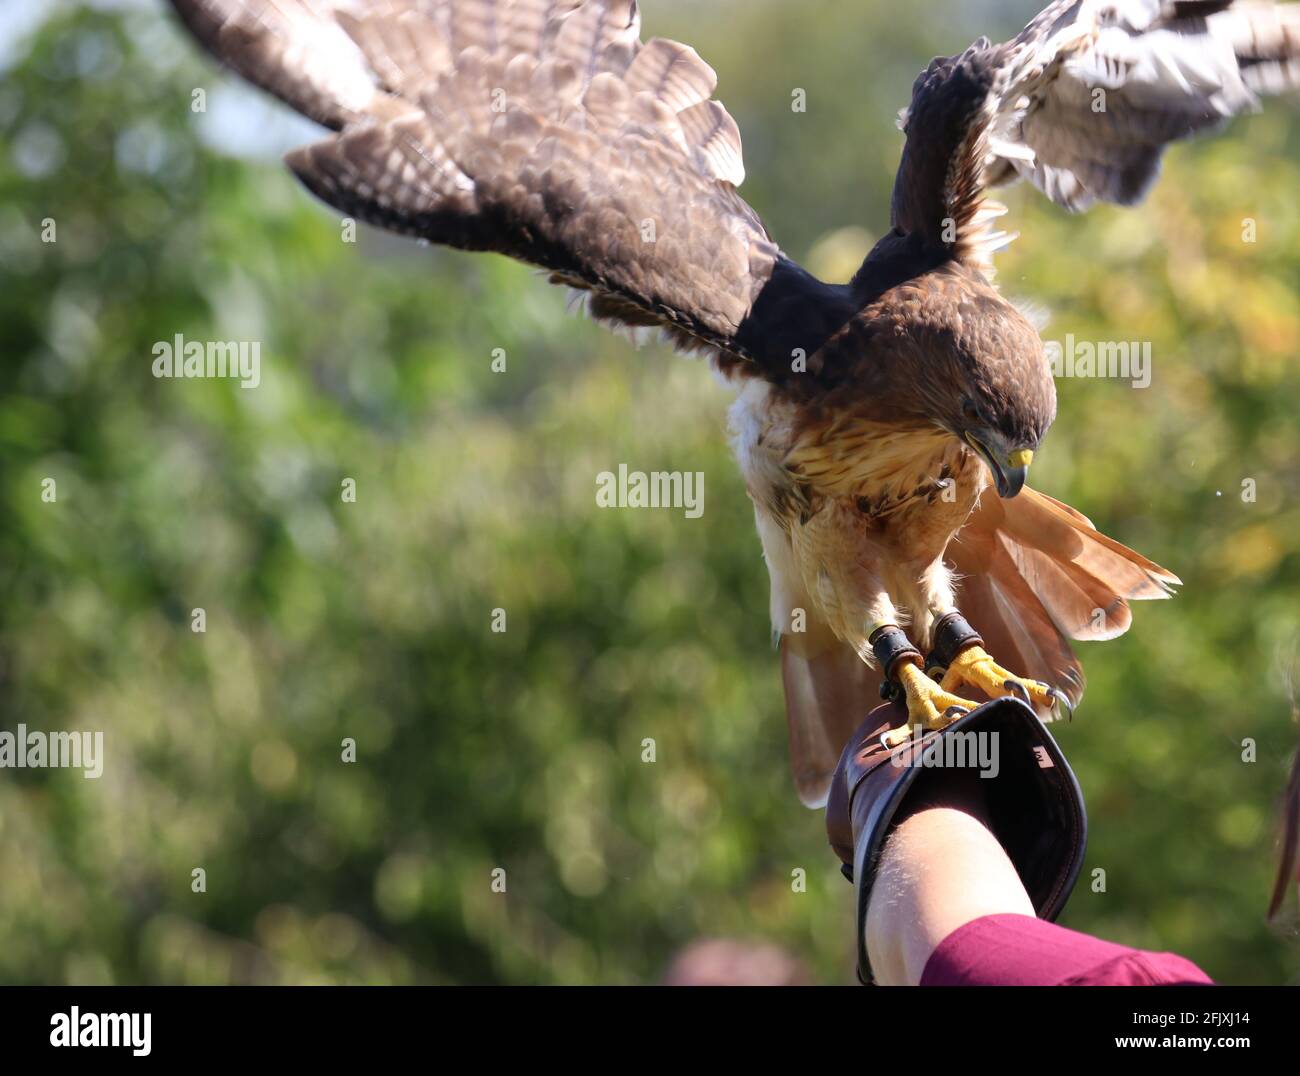 Red tailed hawk flapping wings perched on falconer glove Stock Photo